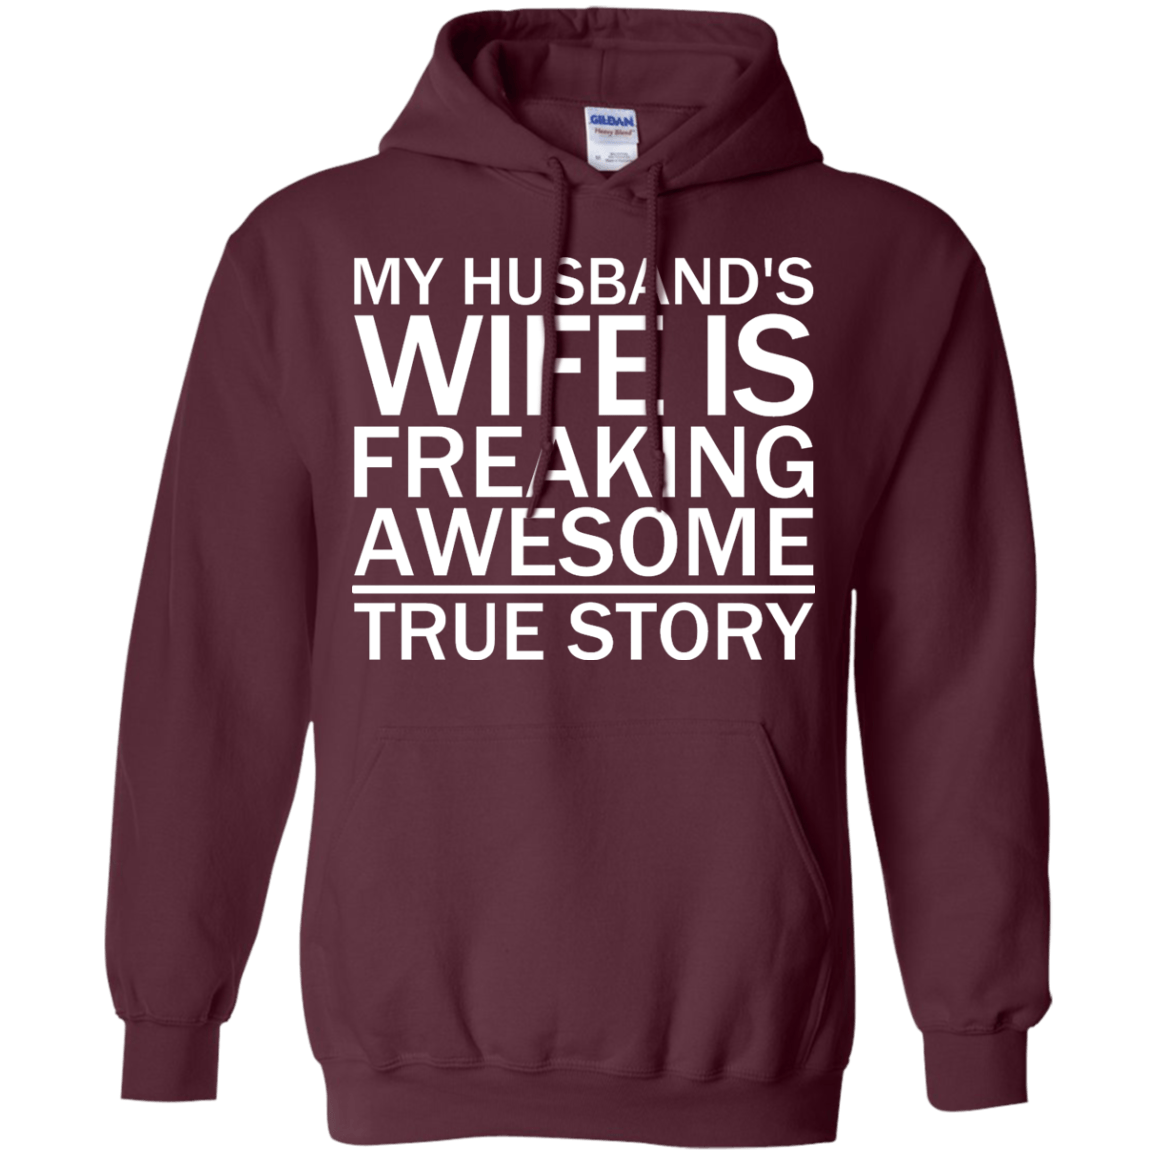 My Husband's Wife Is Freaking Awesome - True Story | Funny T-shirts ...